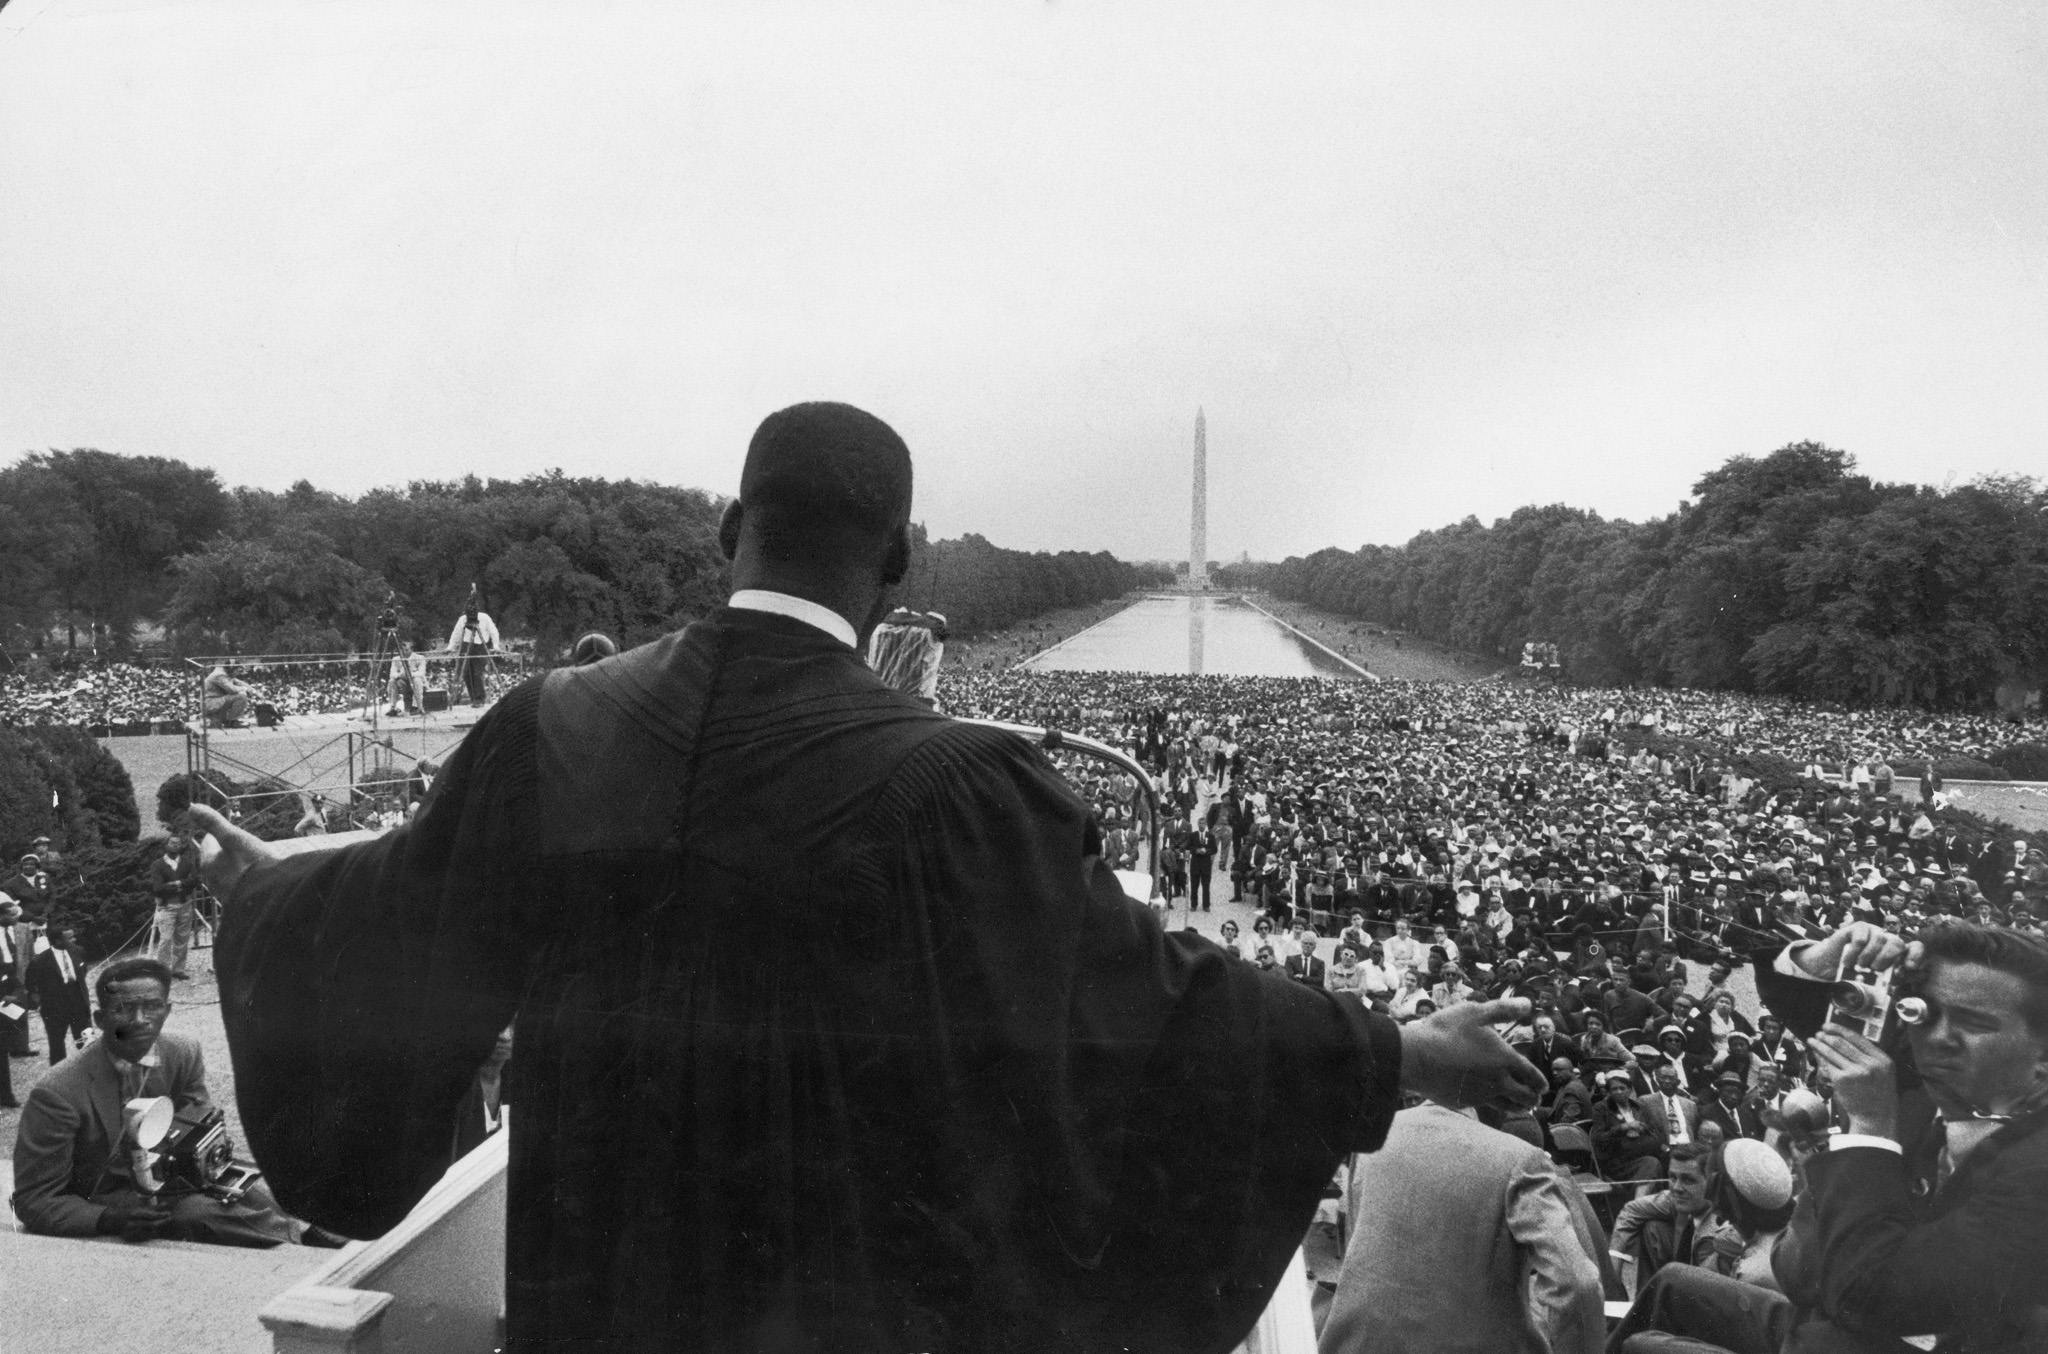 Dr. Martin Luther King Jr. speaks in front of the Lincoln Memorial before 25,000 people at the Prayer Pilgrimage for Freedom, May 1957 to mark the third anniversary of the landmark supreme court decision, Brown v. the Board of Education, which outlawed segregation in public schools. Among his landmark early addresses, King's speech that day was known as "Give Us the Ballot."